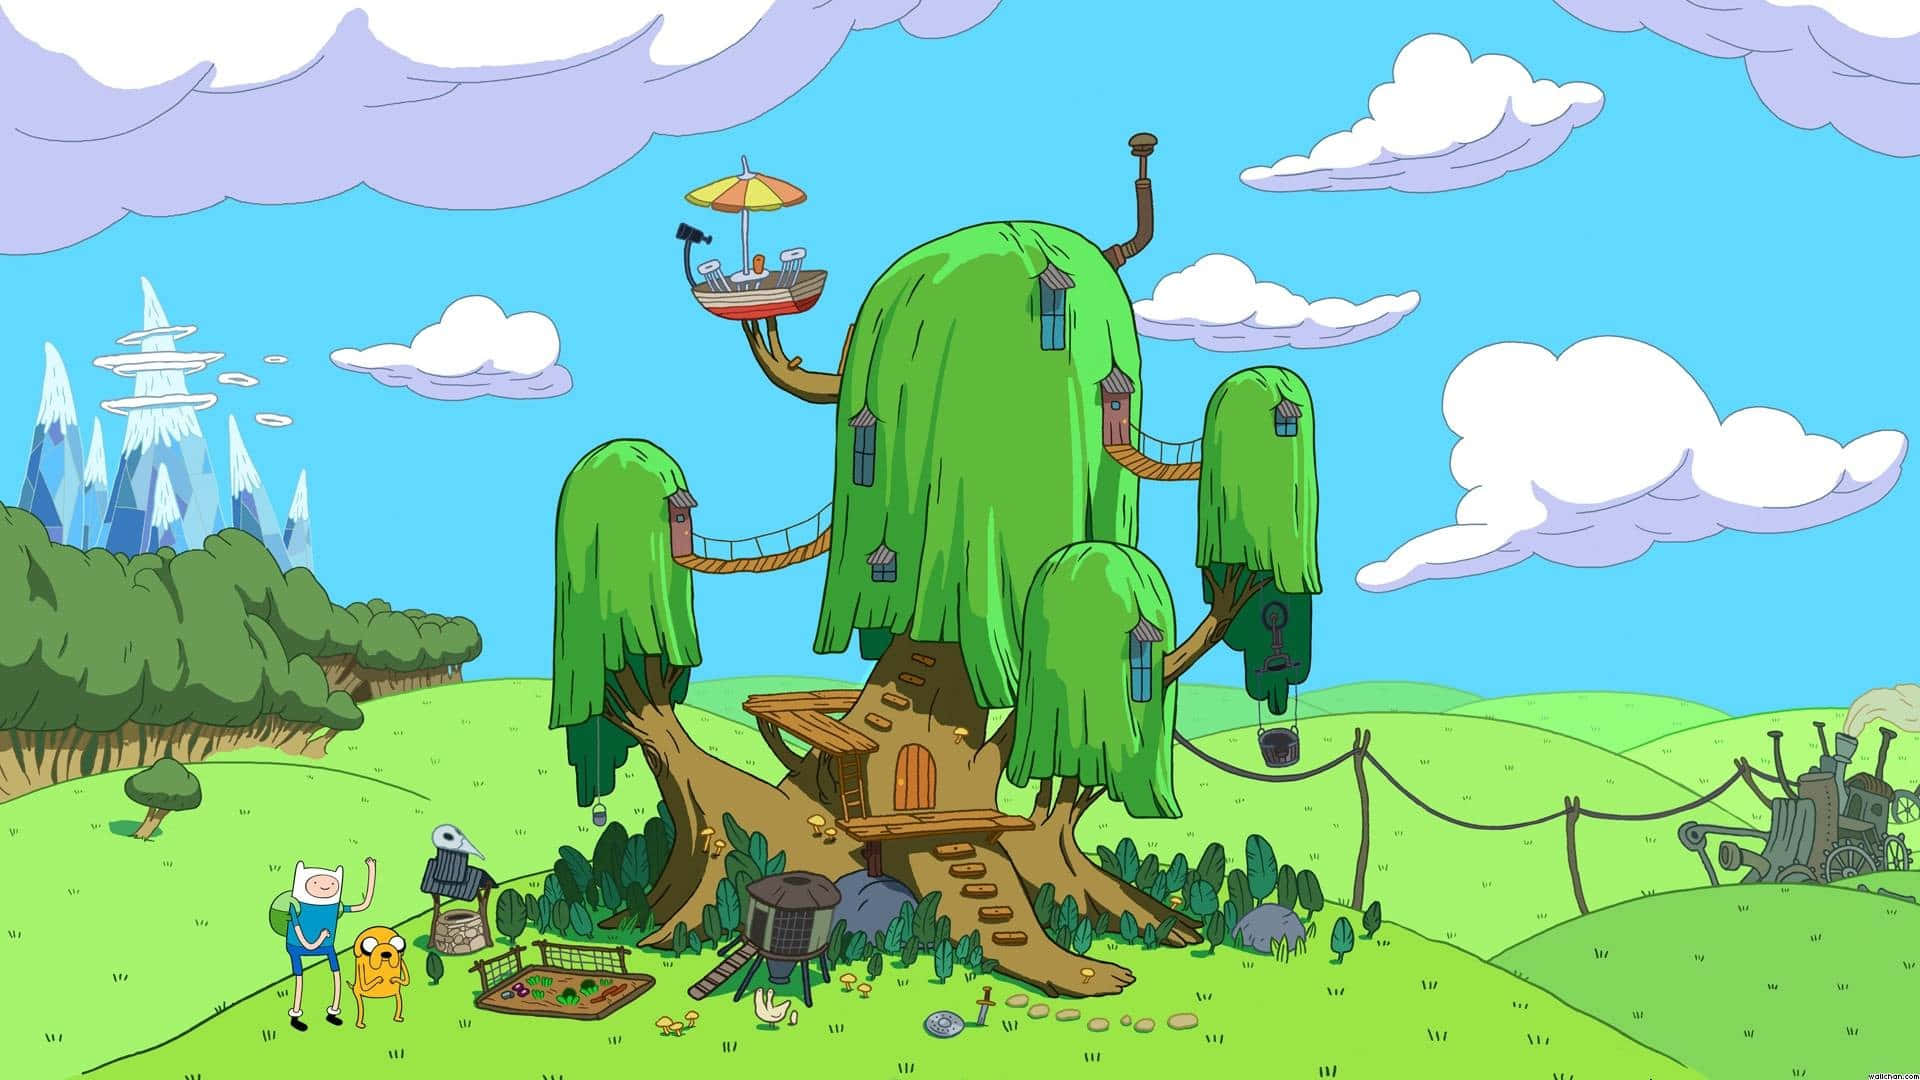 Explore and enjoy your own version of Adventure Time